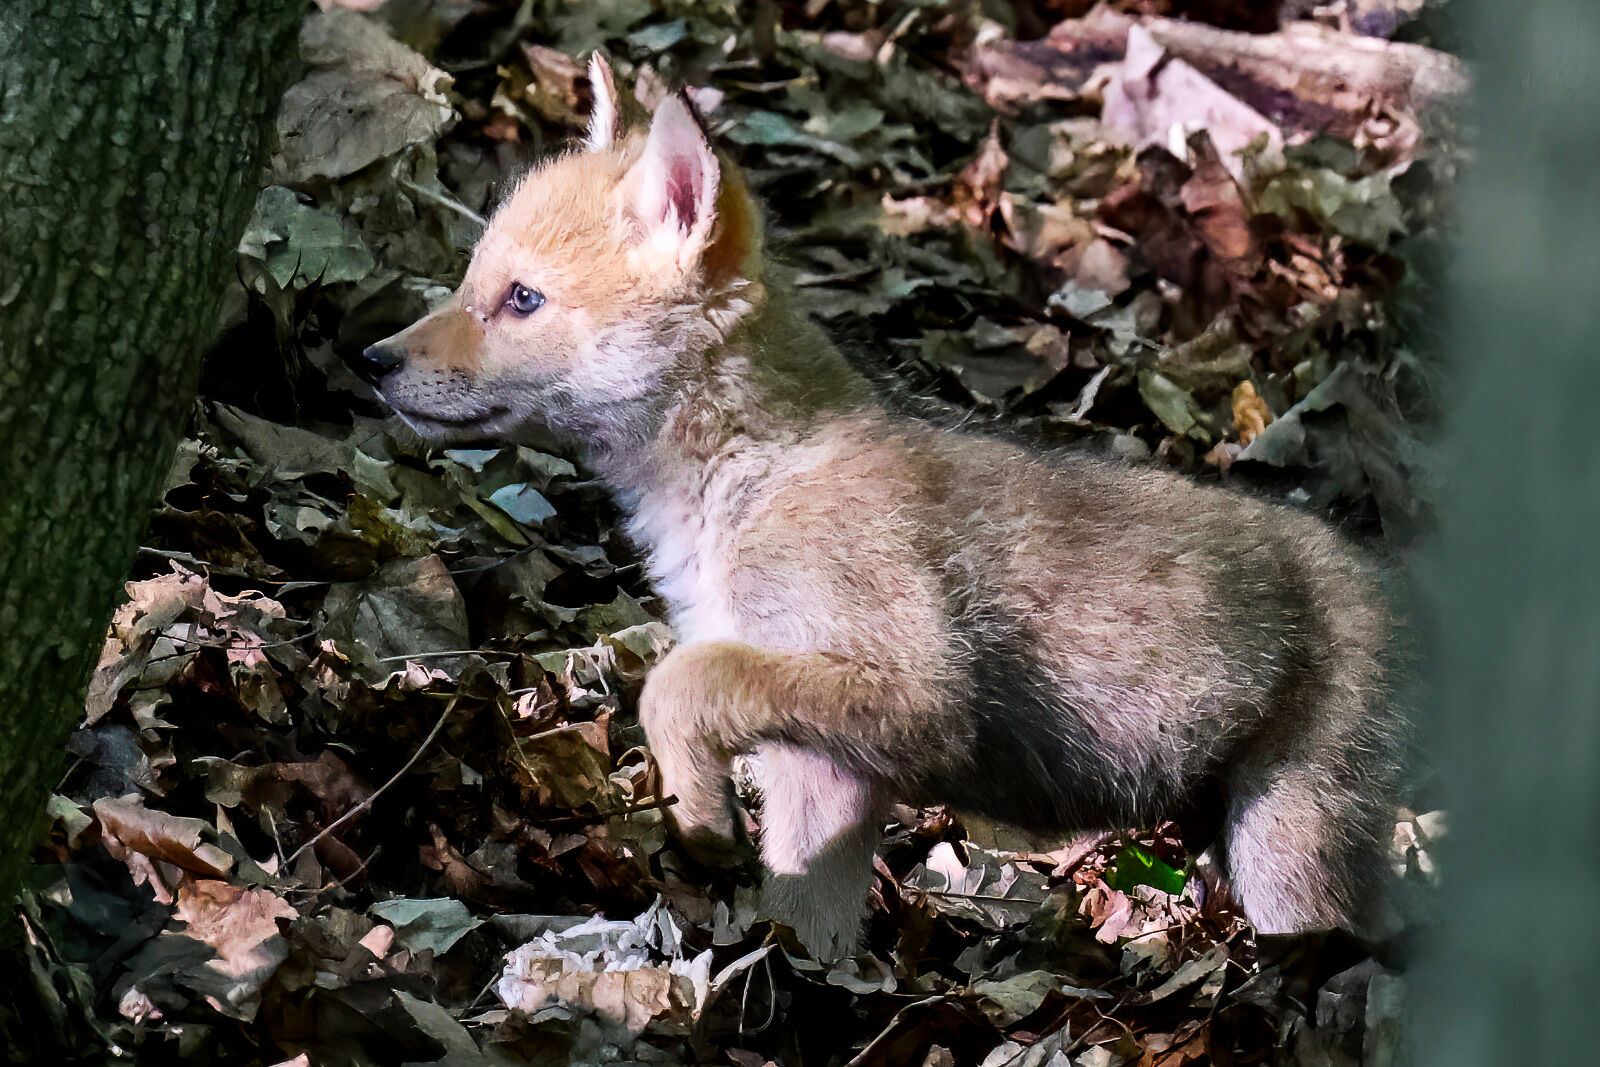 Coyote Pup Tentatively Exploring the World